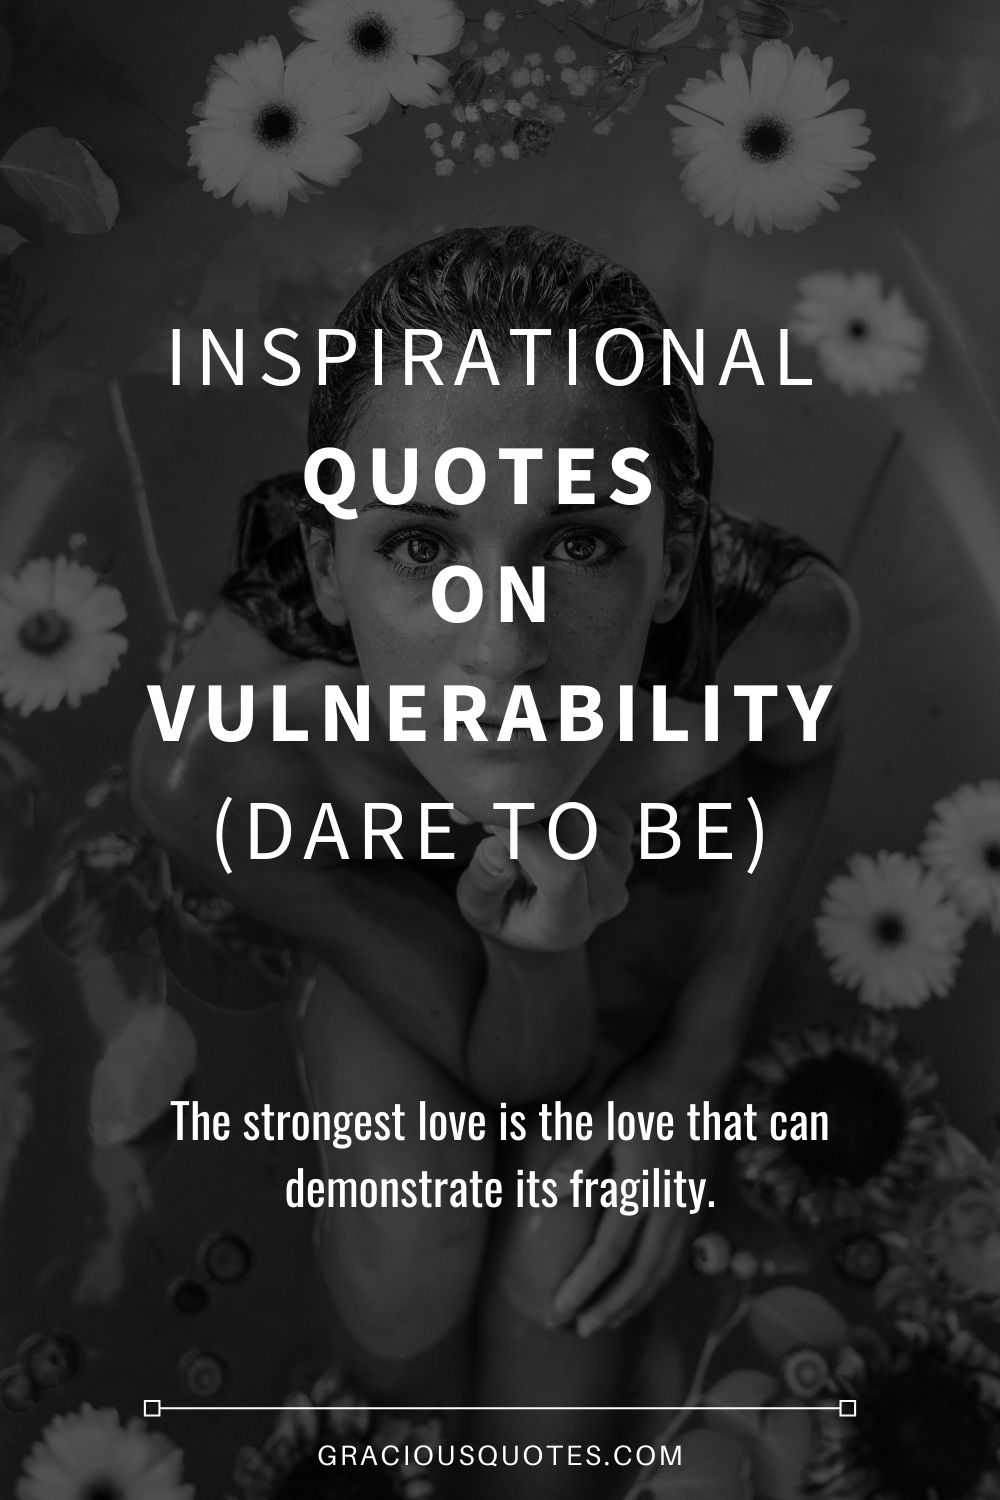 Inspirational Quotes on Vulnerability (DARE TO BE) - Gracious Quotes